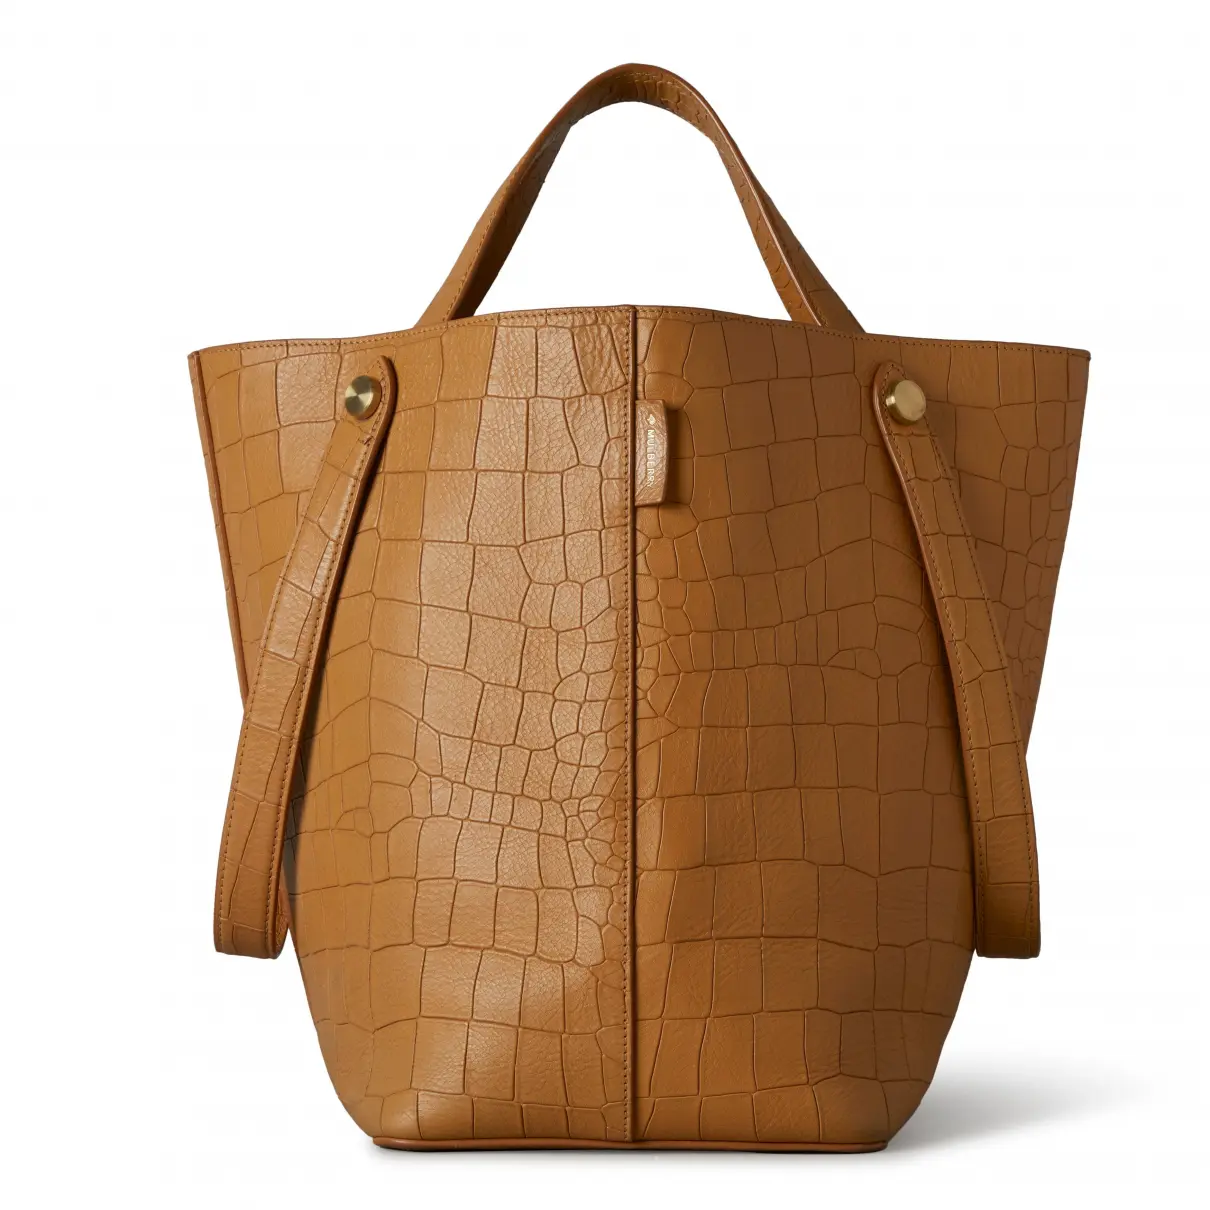 Kite leather tote Mulberry